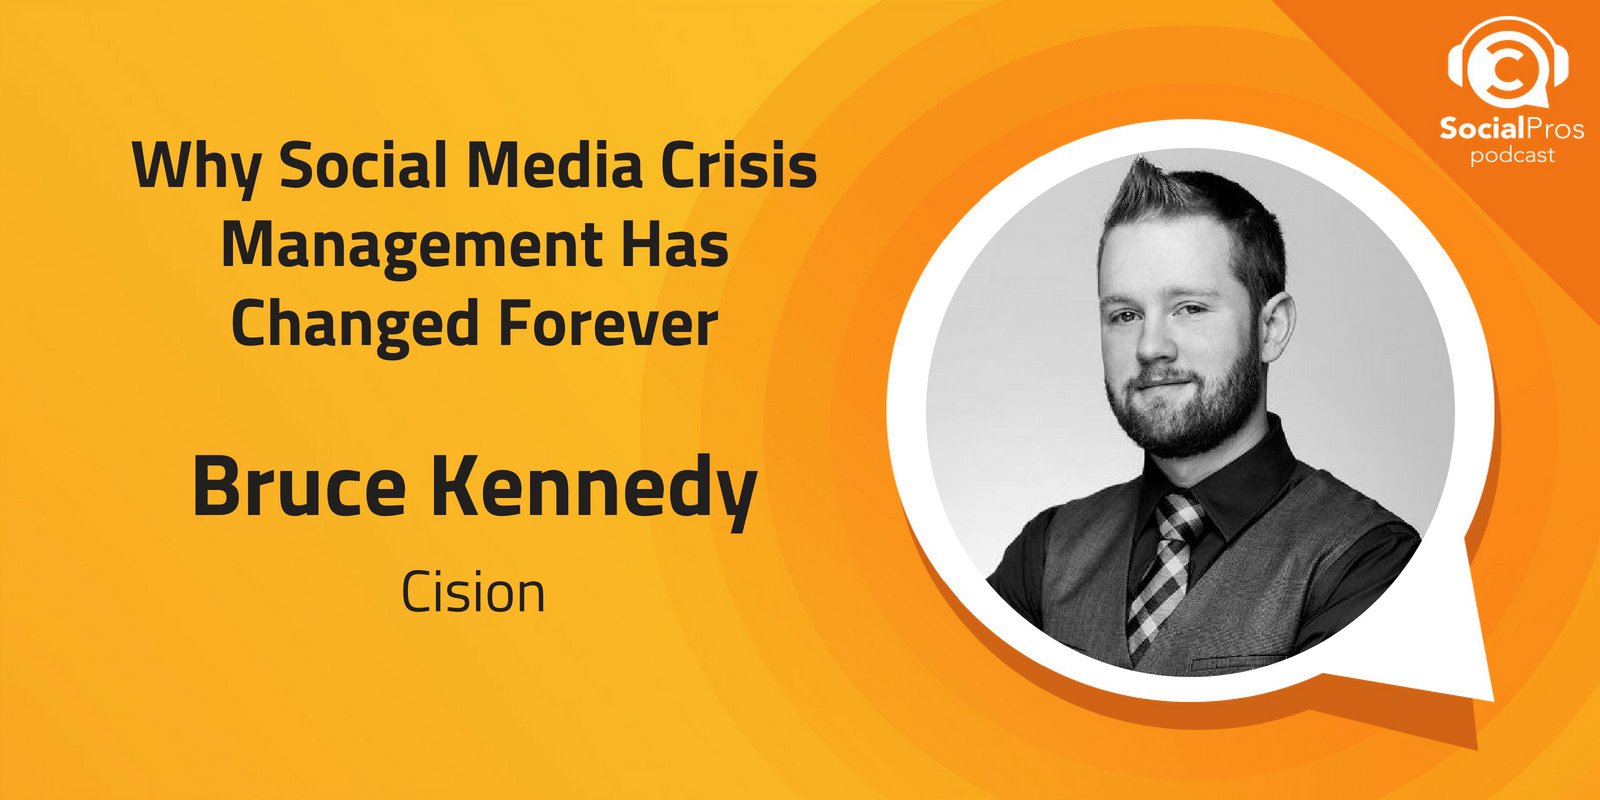 Why Social Media Crisis Management Has Changed Forever